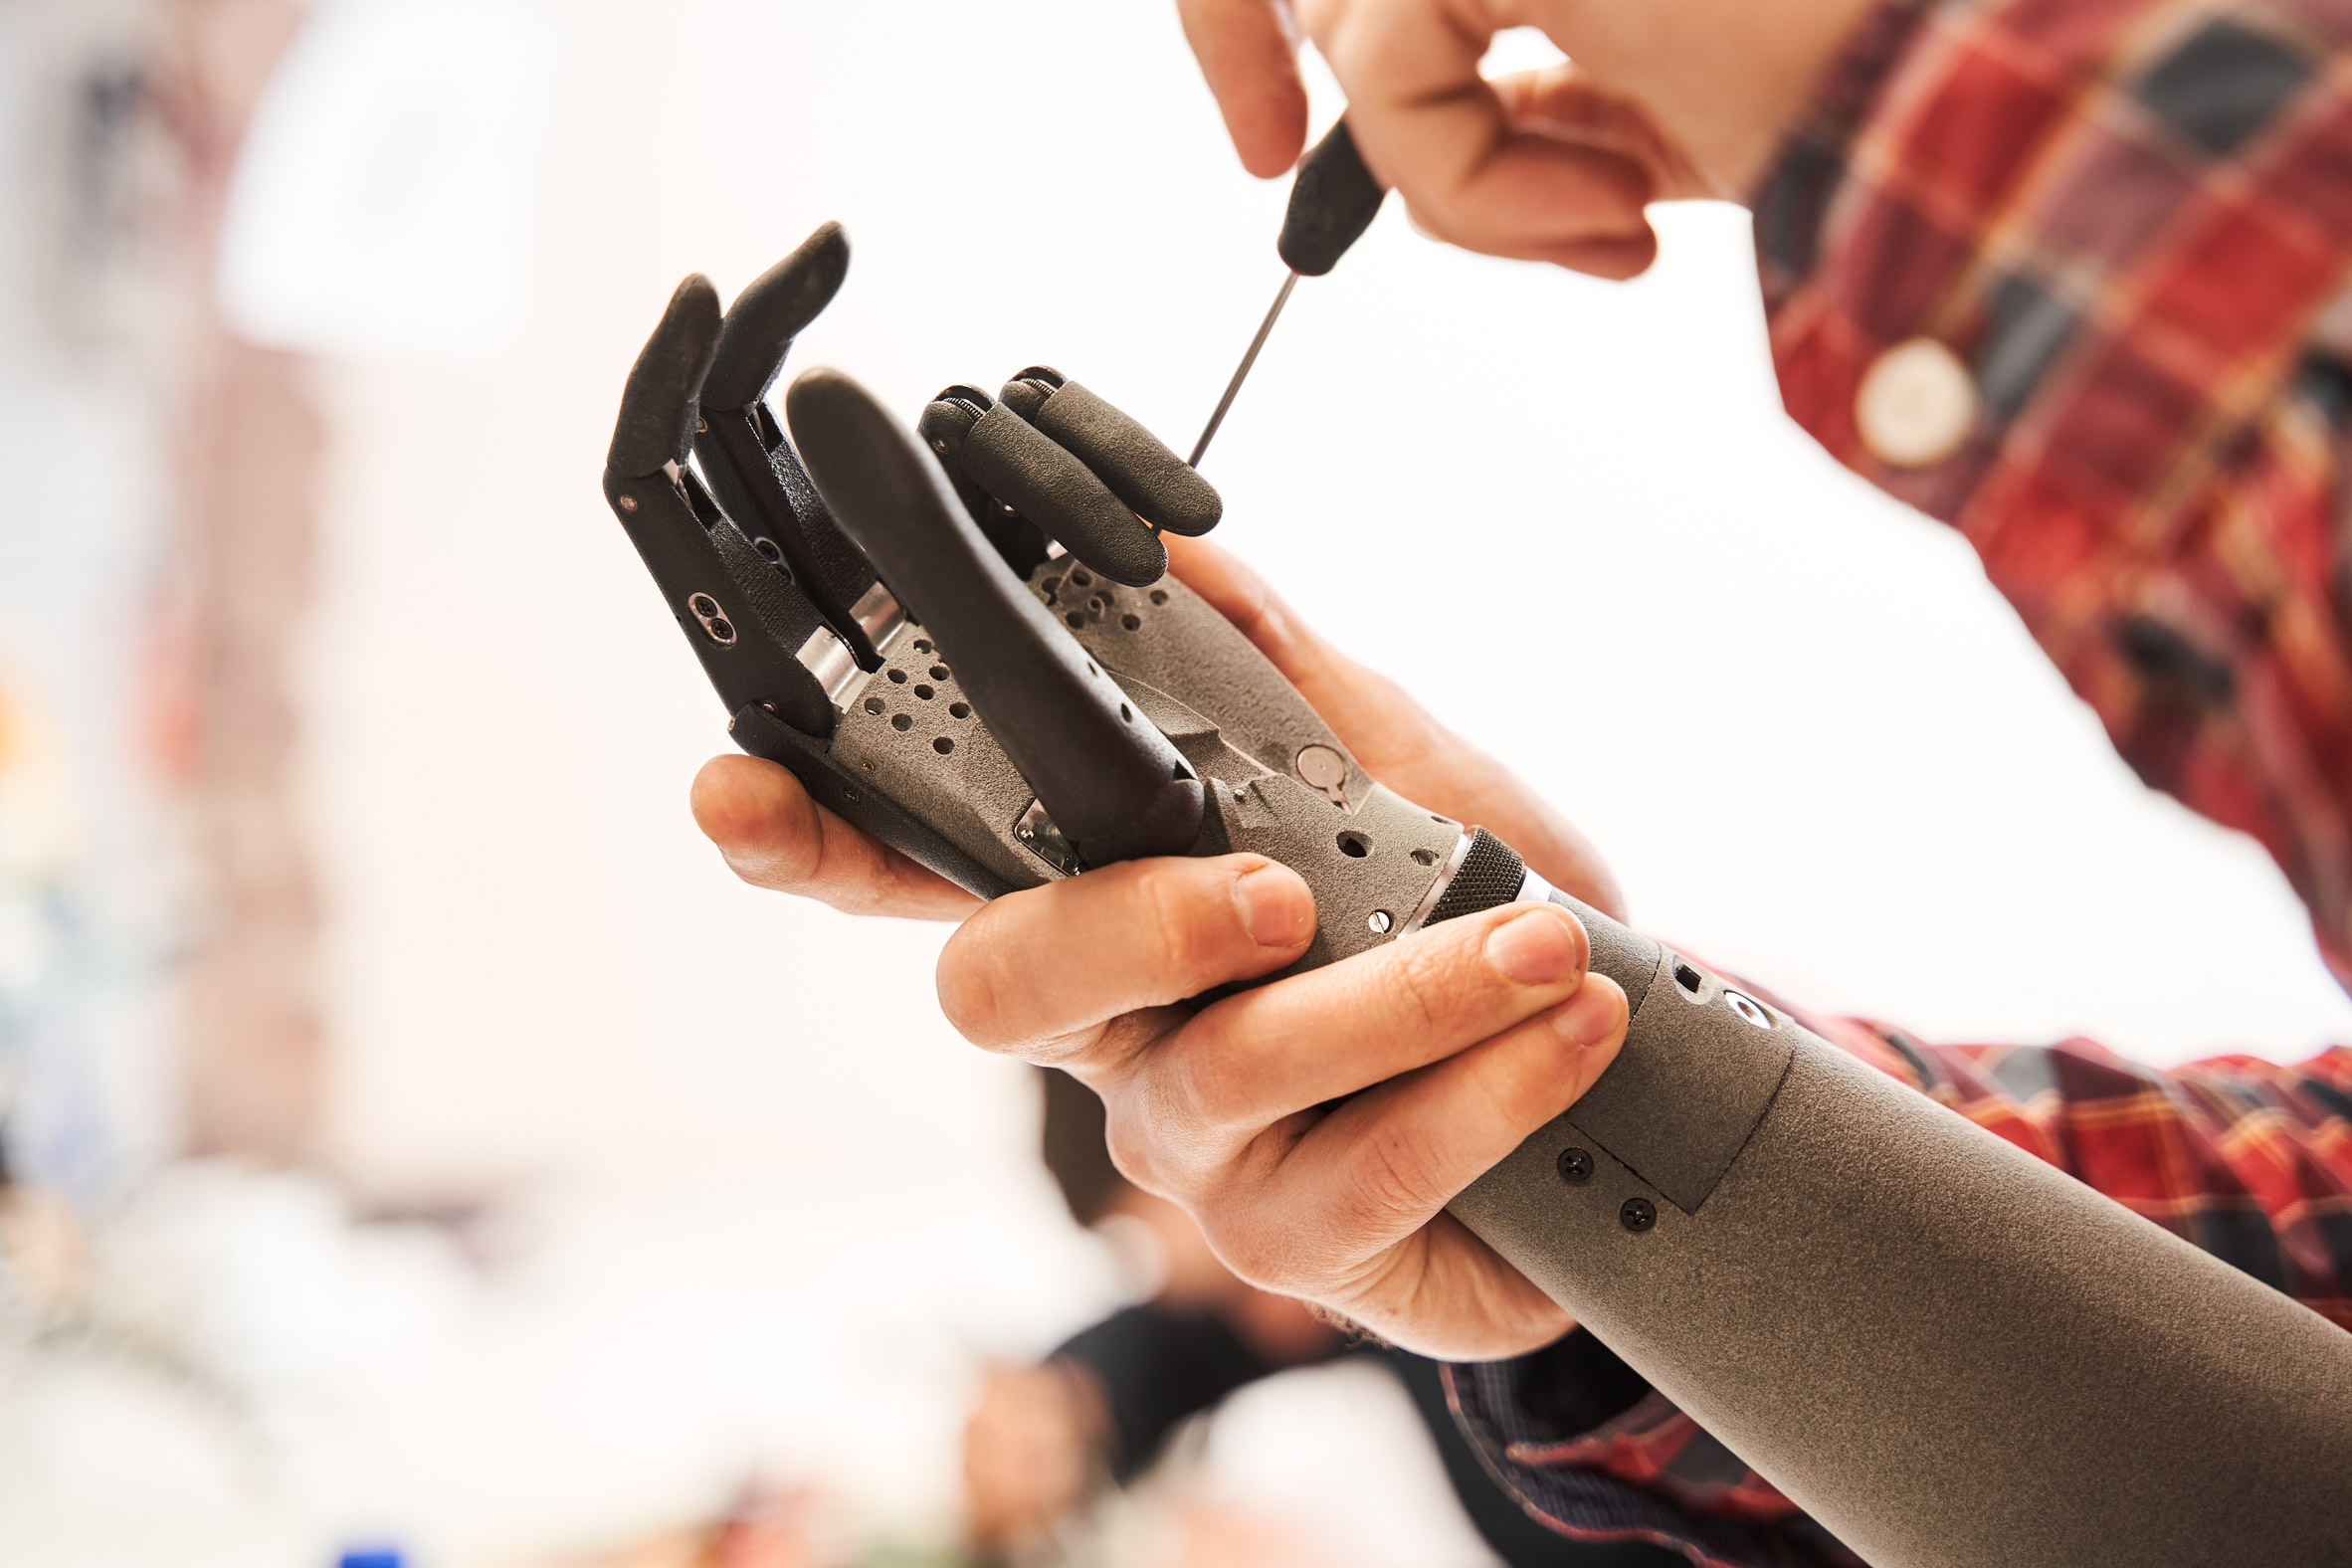 Designing a 3D-printed EMG bionic hand as a low-cost alternative to  prosthetic limbs